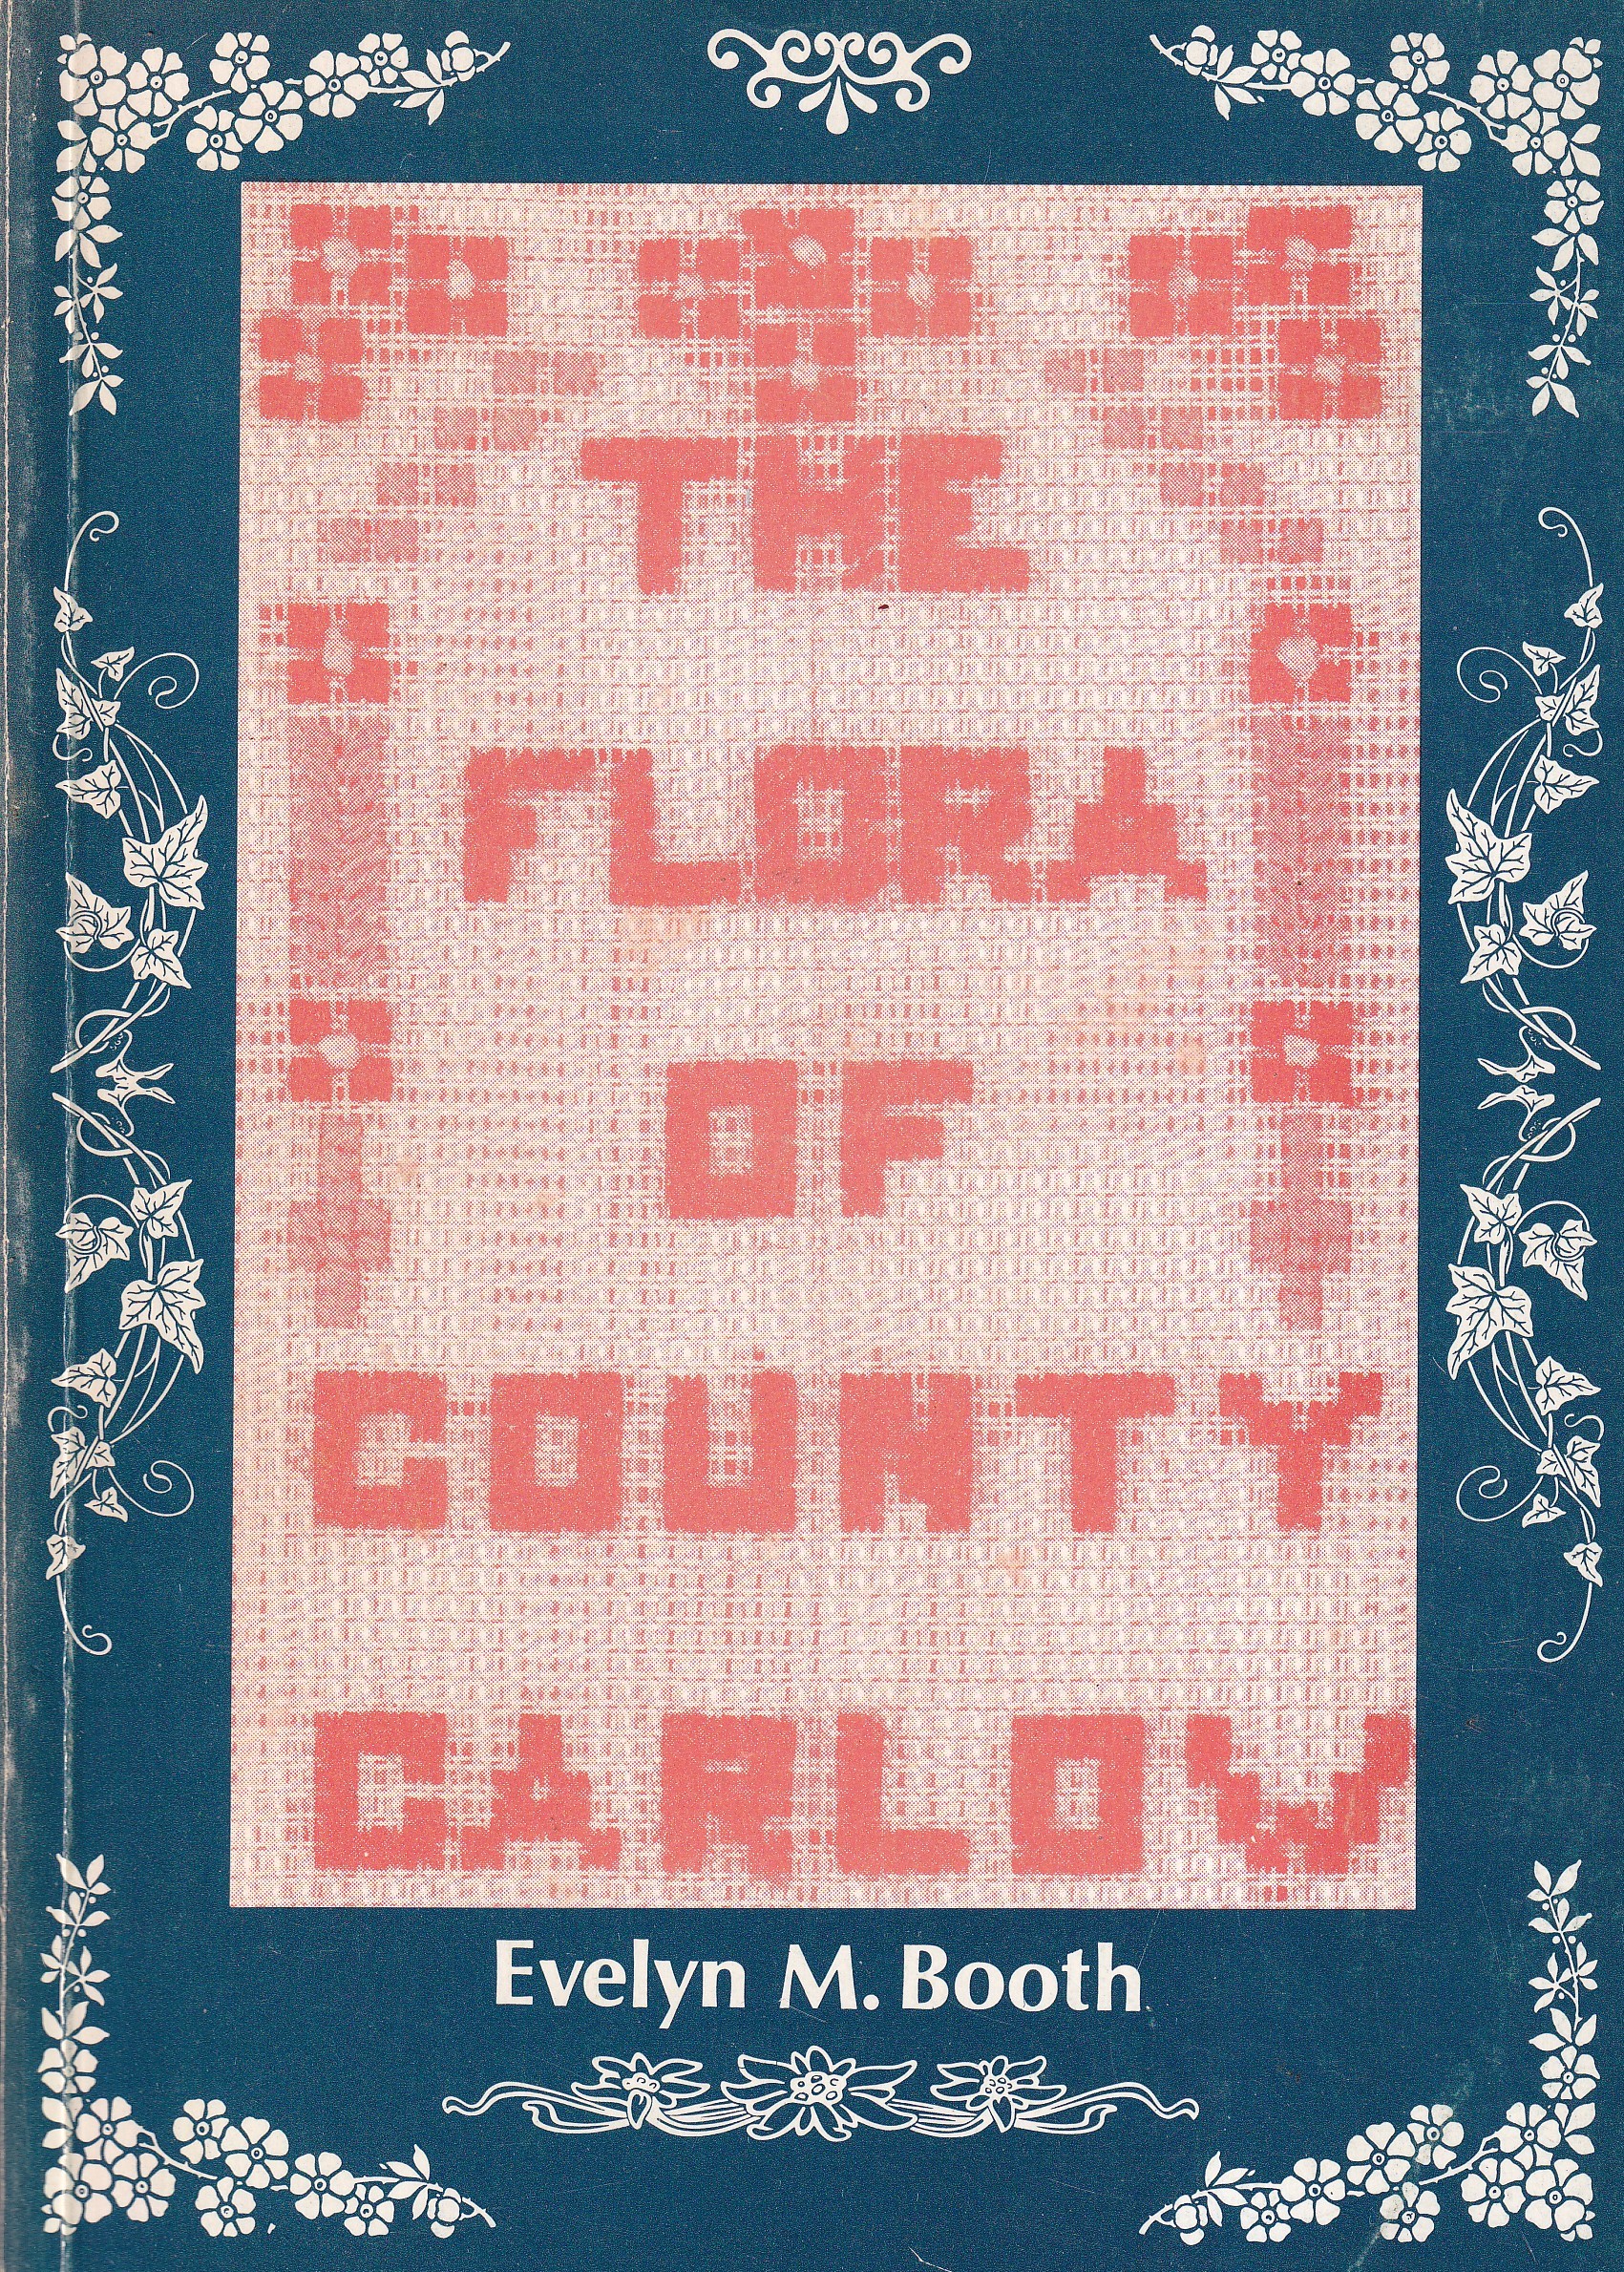 The Flora of County Carlow | Evelyn M. Booth | Charlie Byrne's